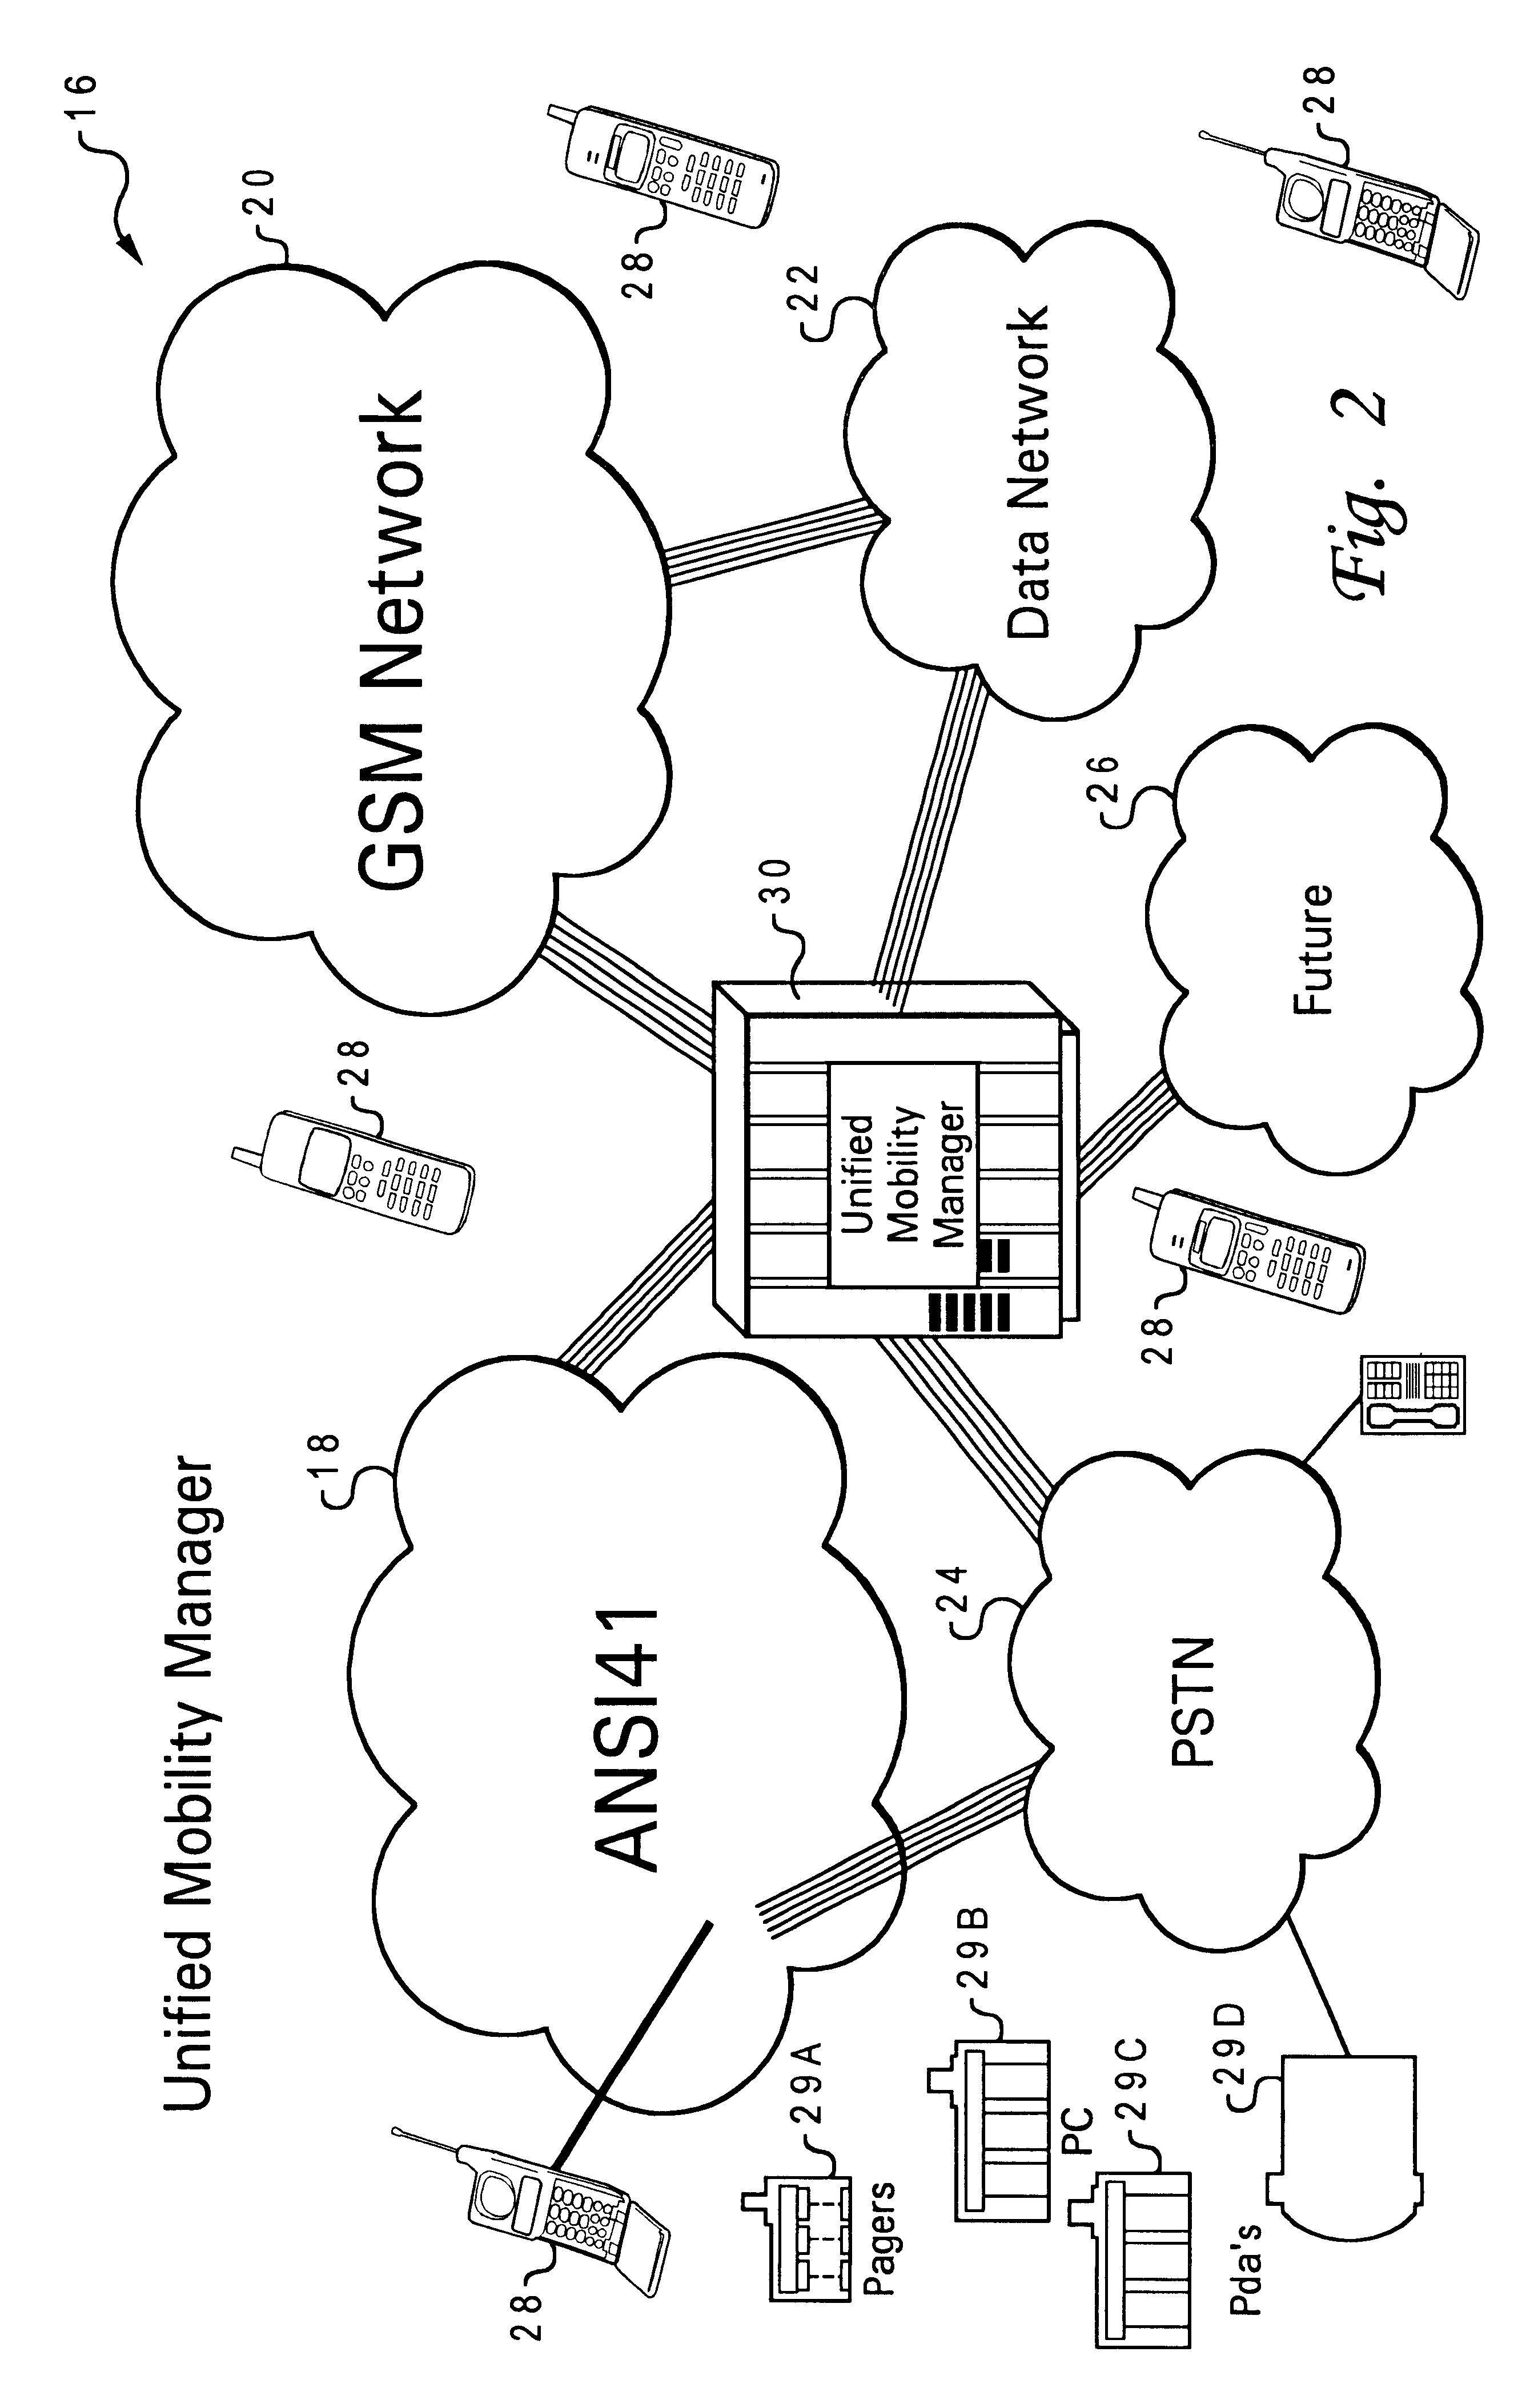 System and method for unifying the implementation and processing of mobile communications and a unified mobility manager for providing such communications